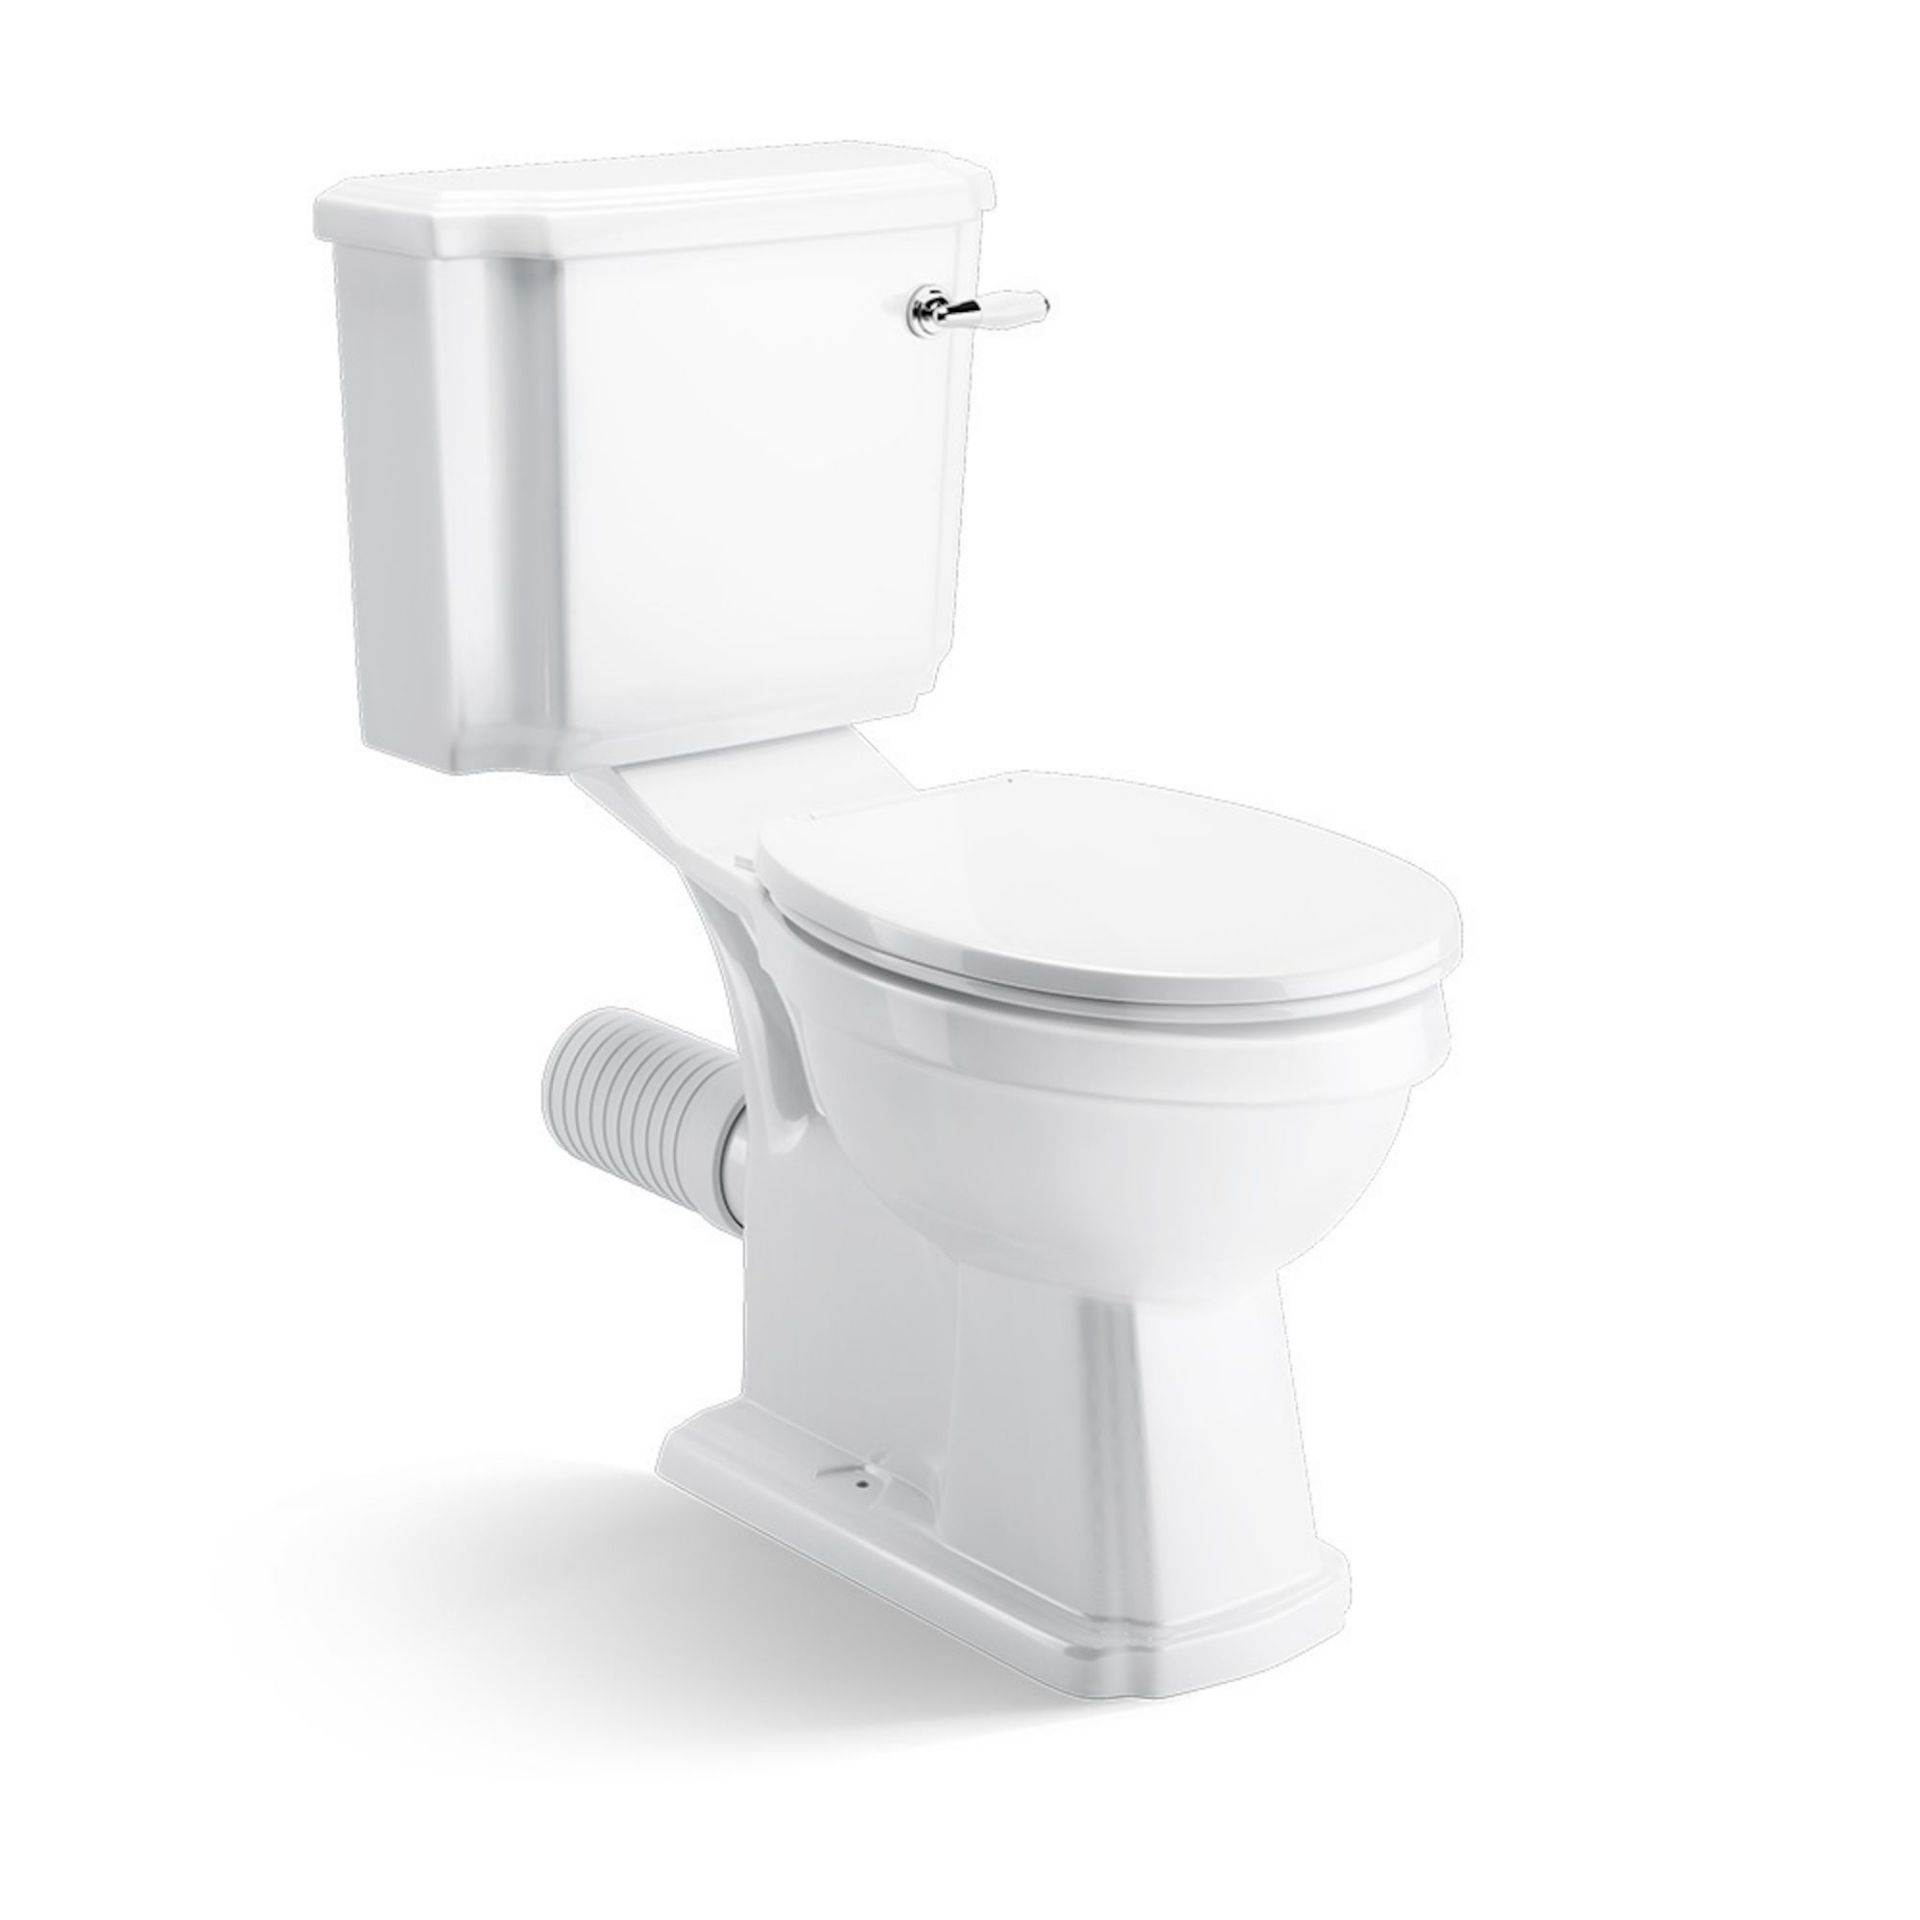 NEW & BOXED Cambridge Traditional Close Coupled Toilet & Cistern - White Seat. CCG629PAN.Tradit... - Image 2 of 3